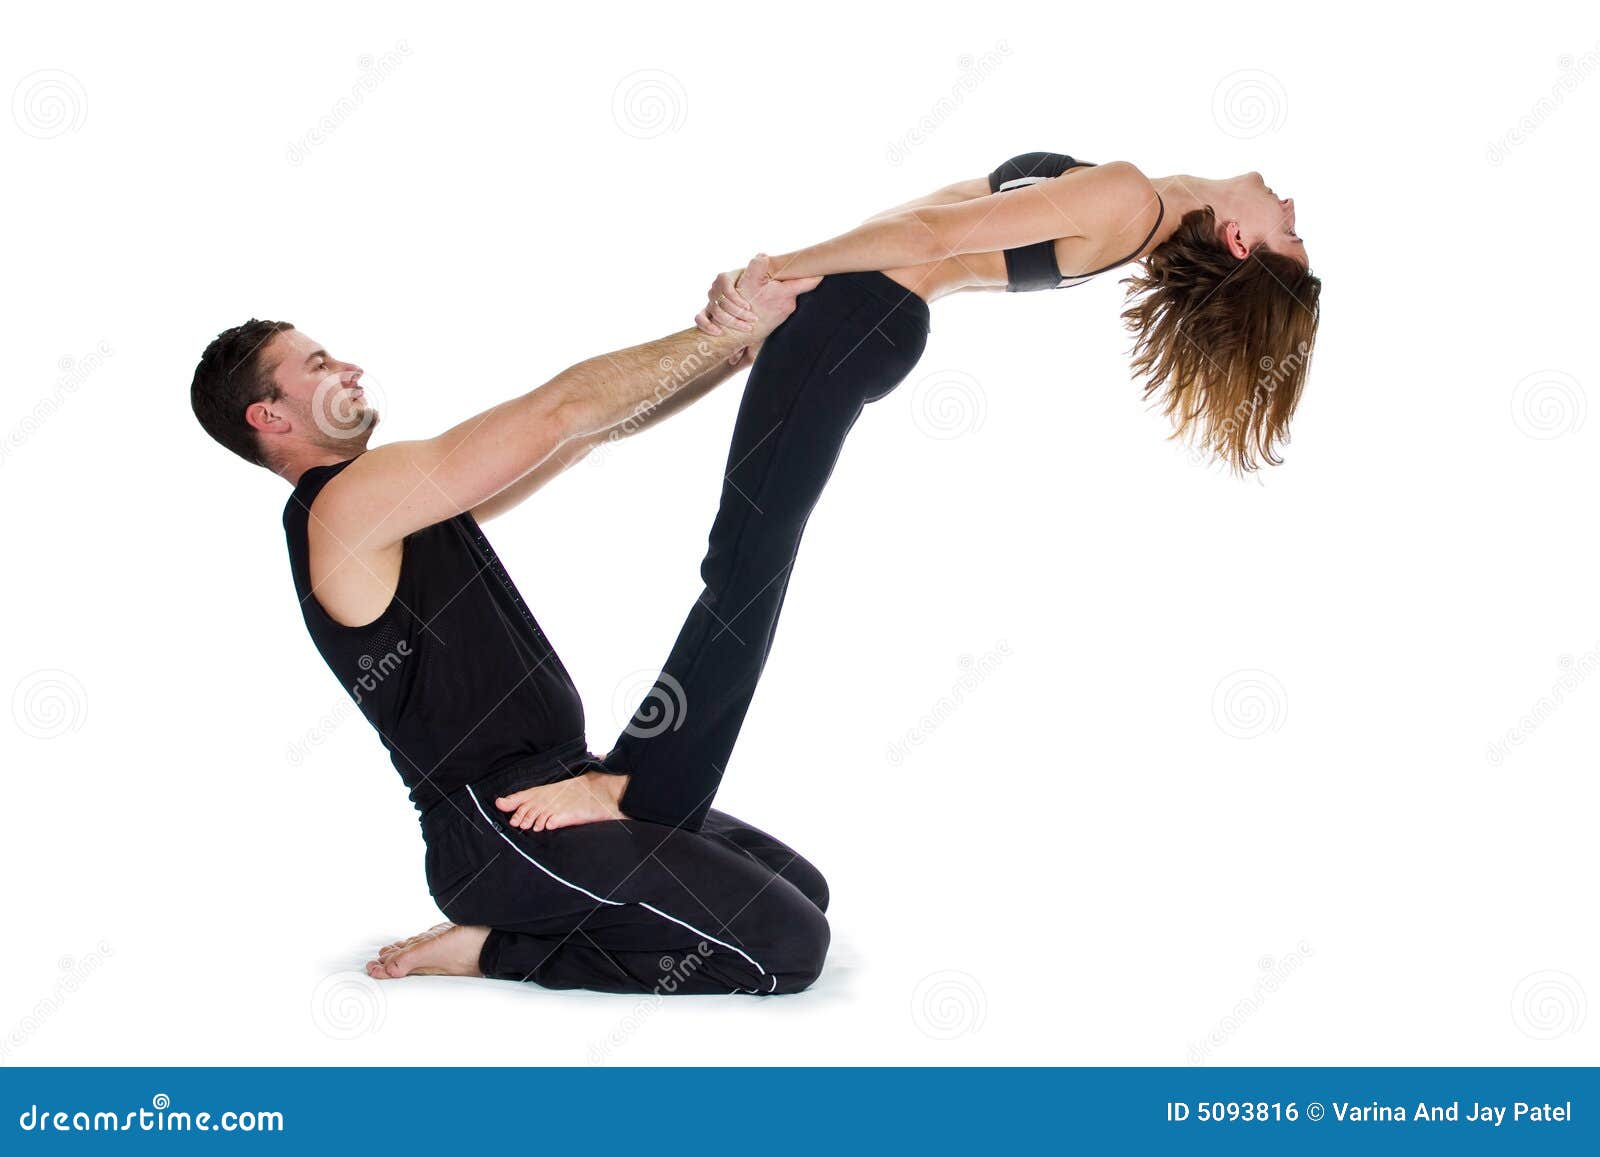 practicing a Male poses pose.  yoga and challenge double yoga female gymnasts complex yoga